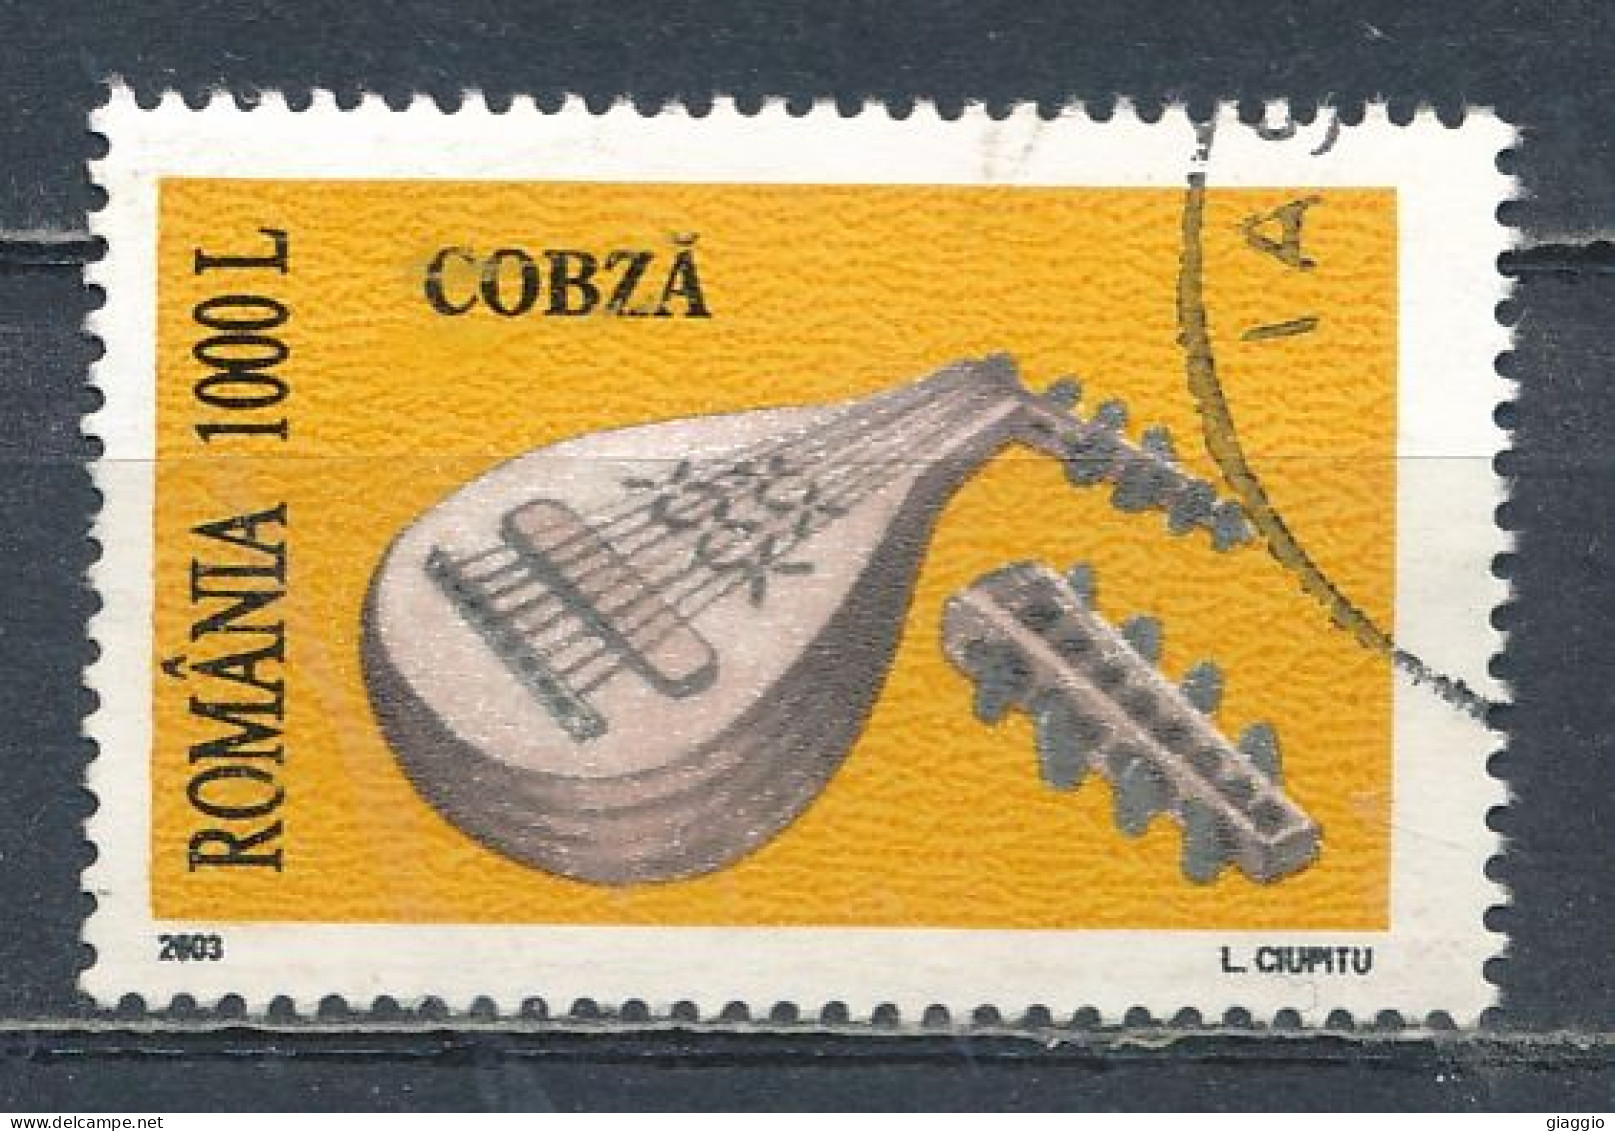 °°° ROMANIA - Y&T N° 4844 - 2003 °°° - Used Stamps